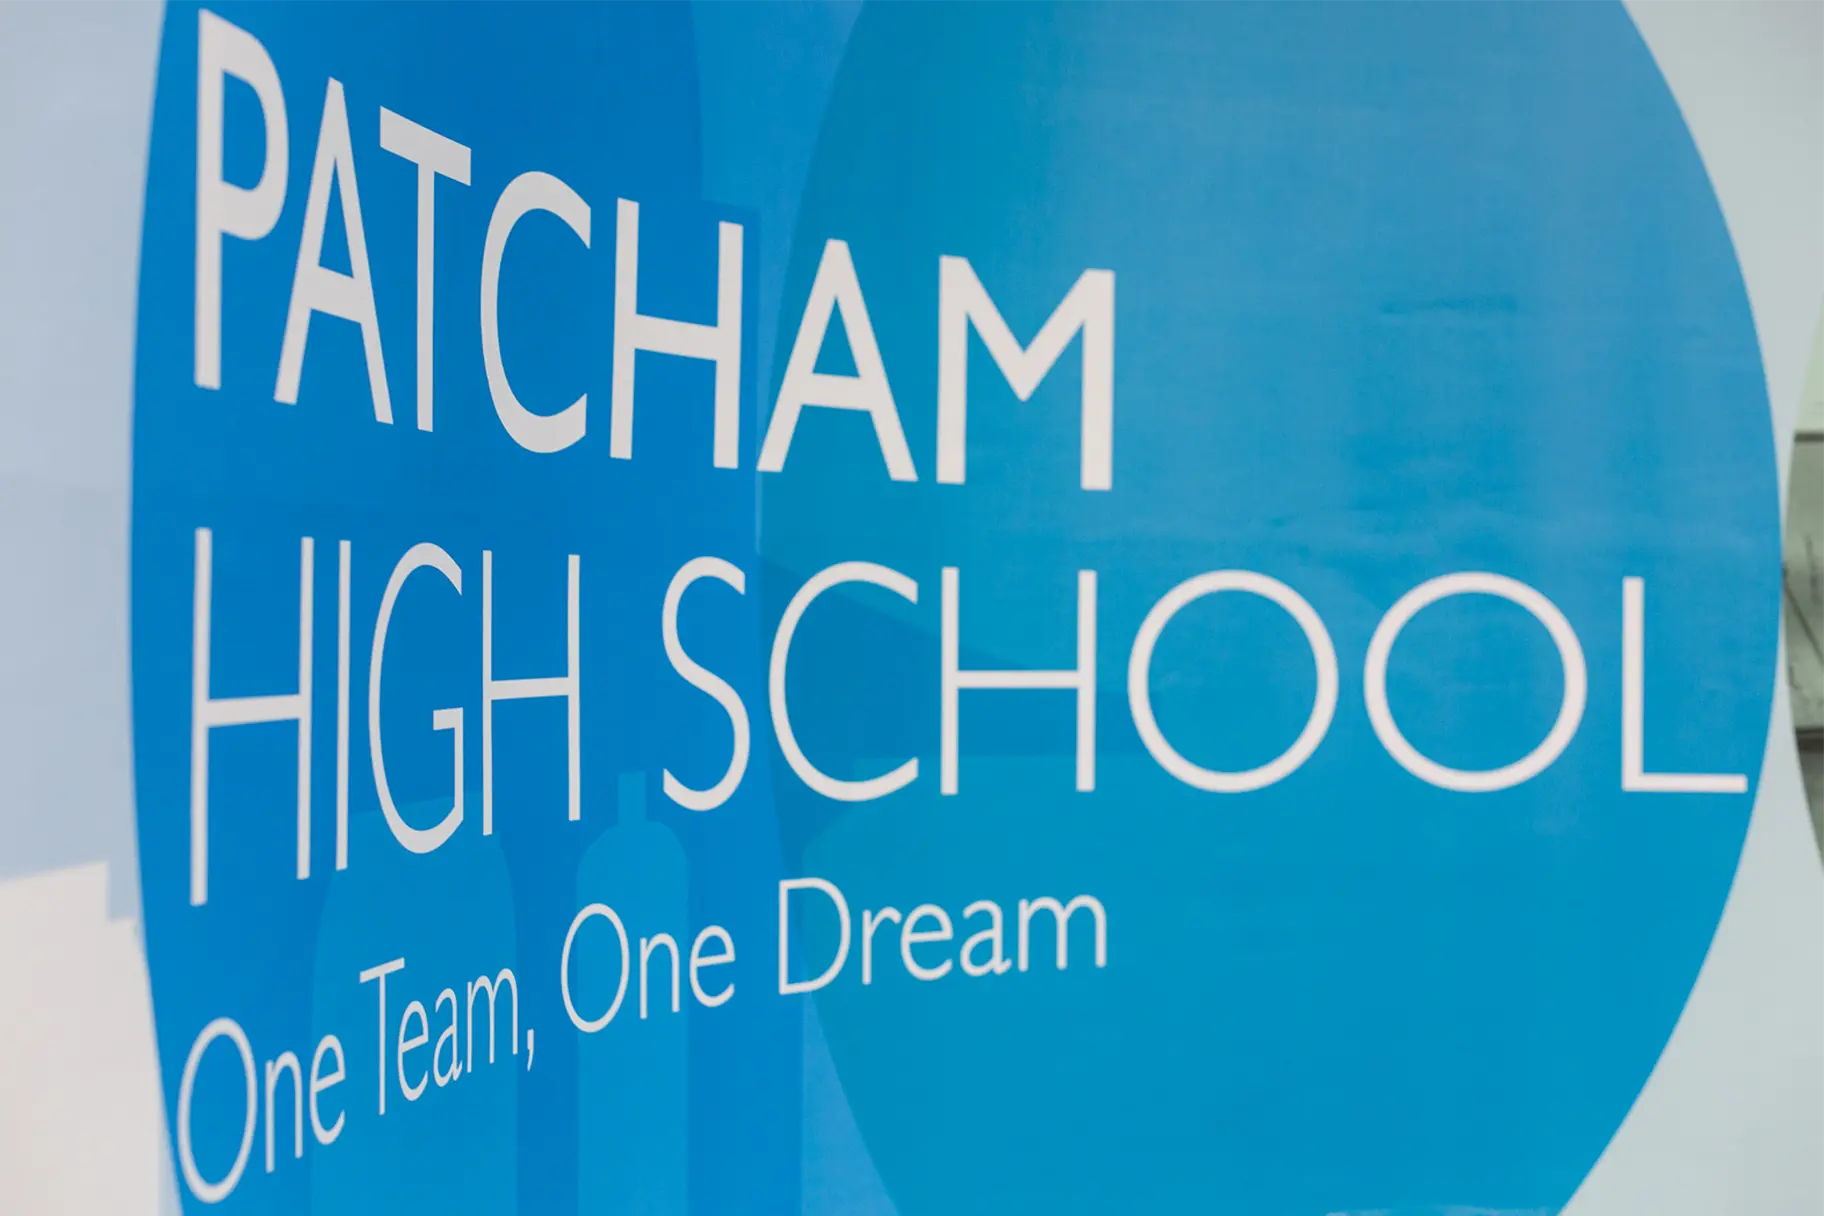 Patcham High school welcome signage wall art